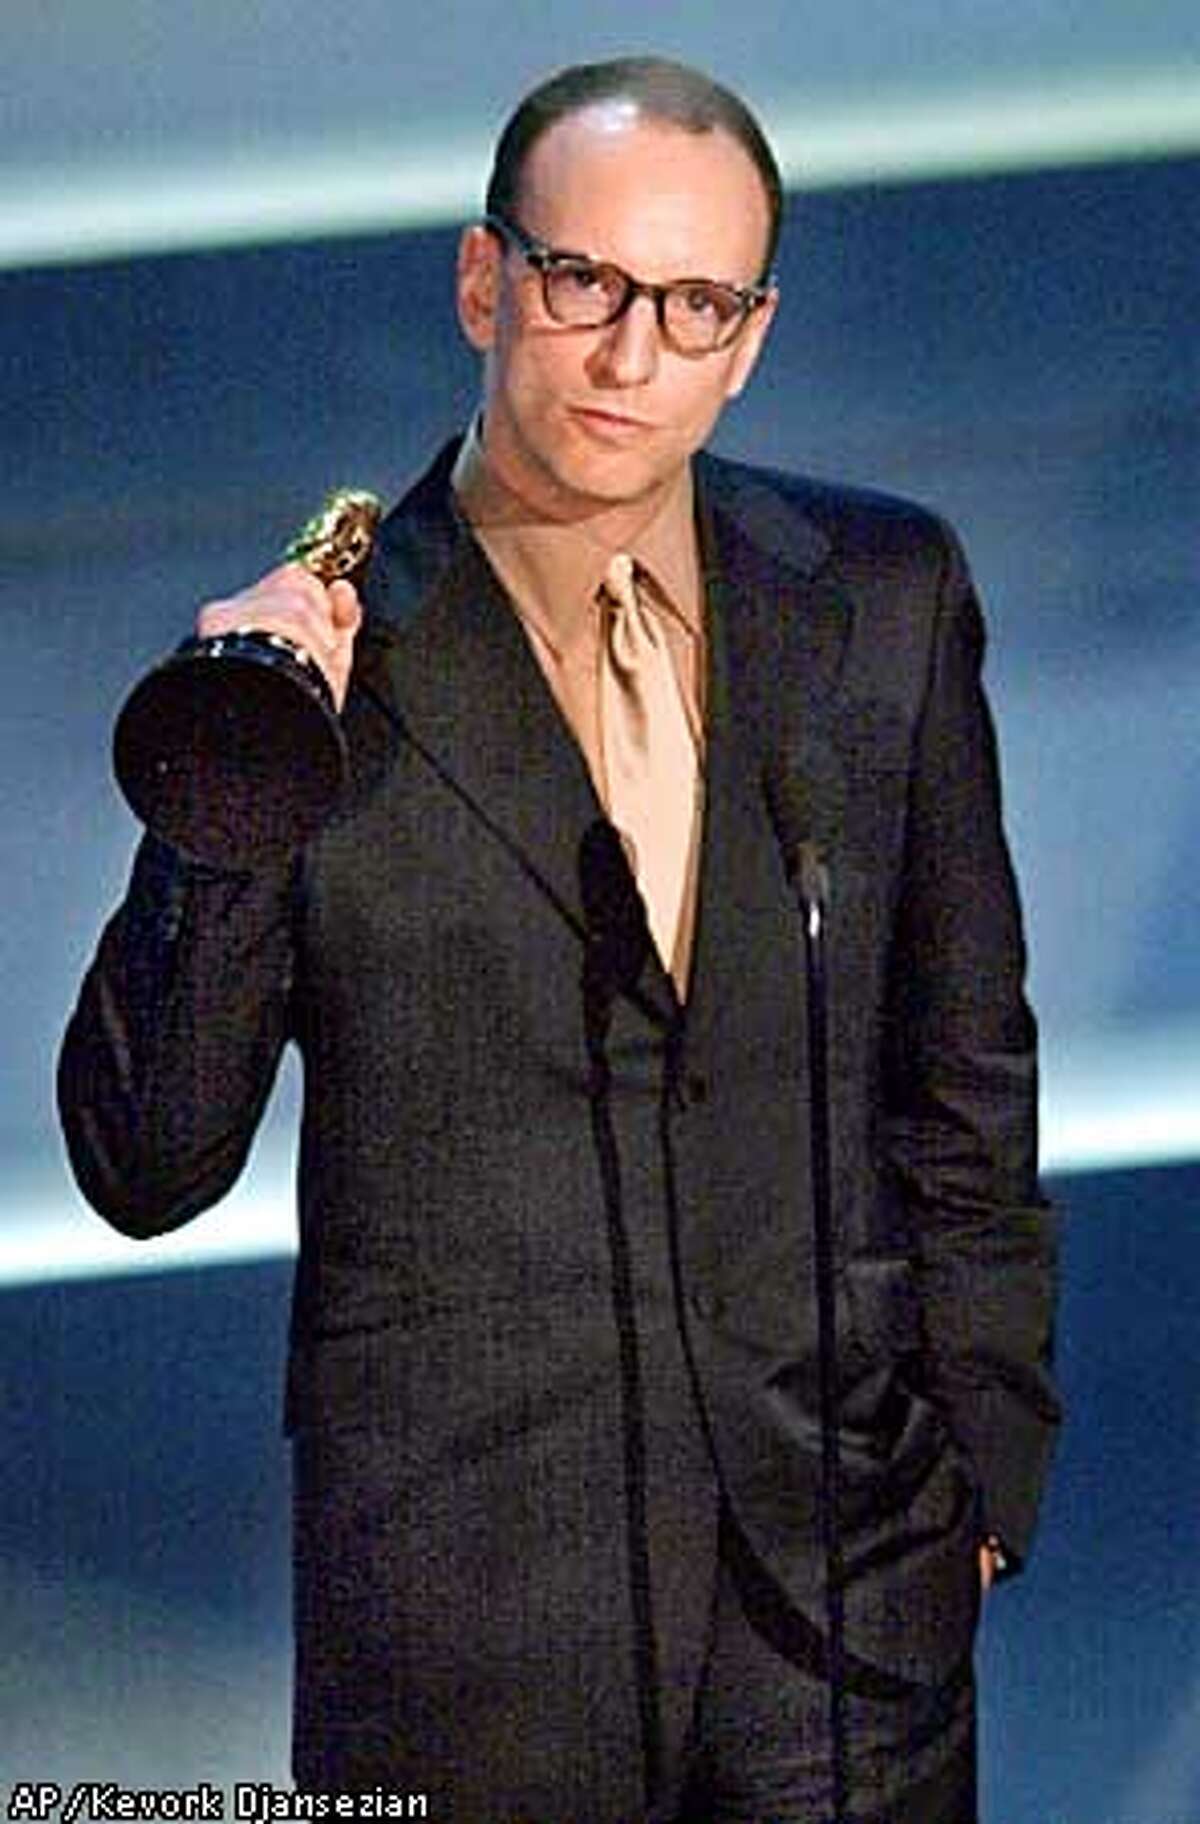 Steven Soderbergh holds up his Oscar for best director for the film "Traffic," as he speaks during the 73rd annual Academy Awards Sunday March 25, 2001 in Los Angeles. (AP Photo/Kevork Djansezian)